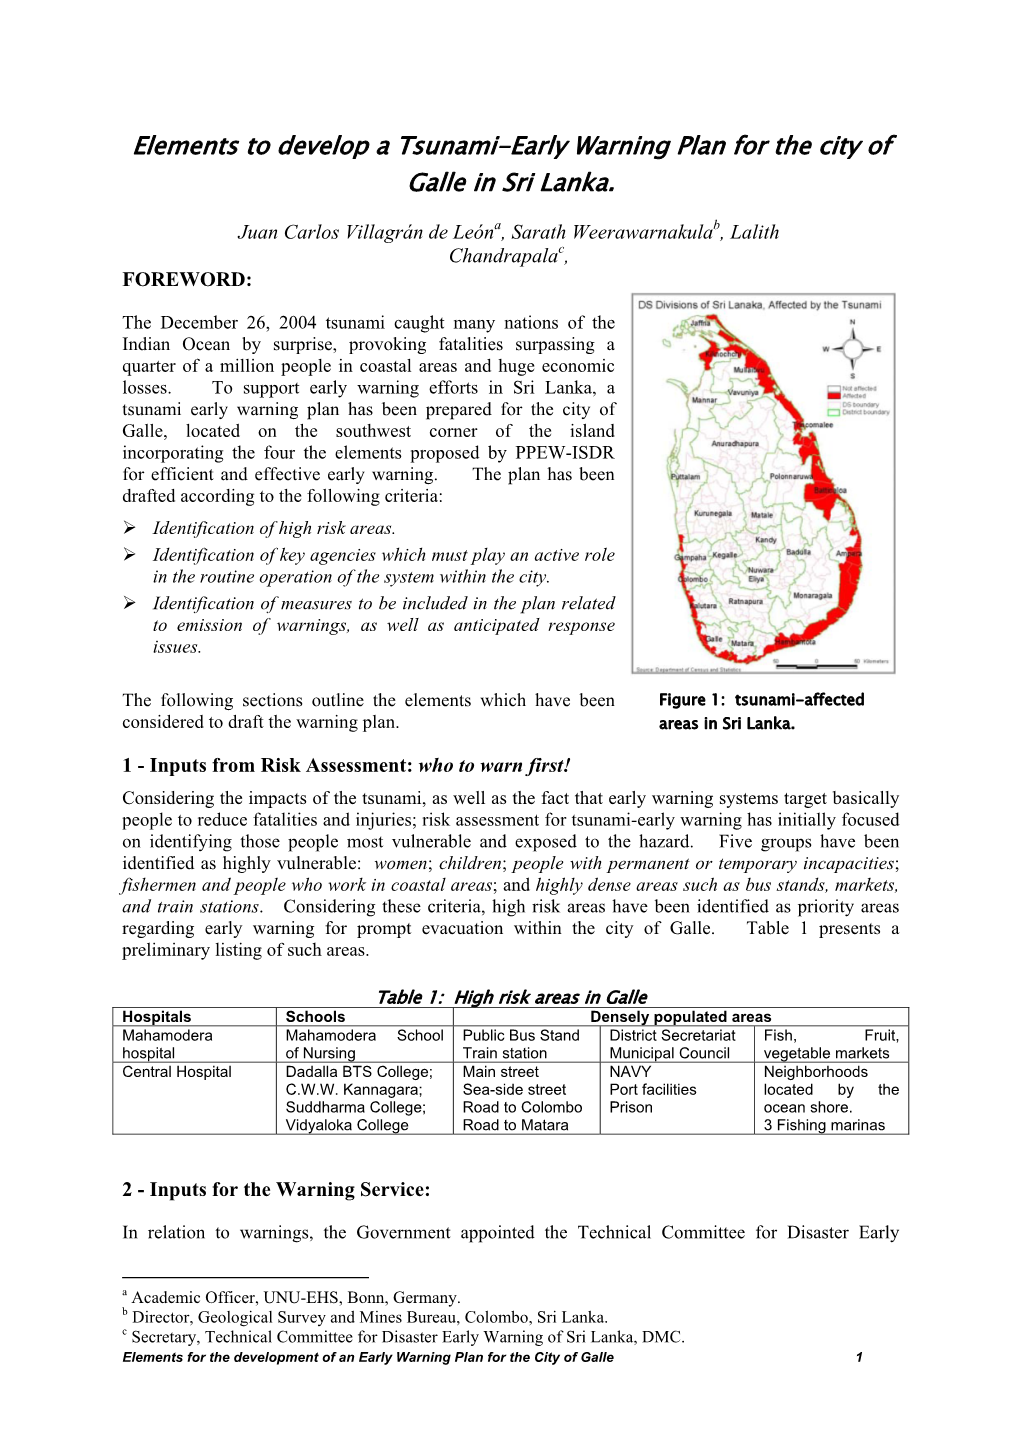 Elements to Develop a Tsunami-Early Warning Plan for the City of Galle in Sri Lanka